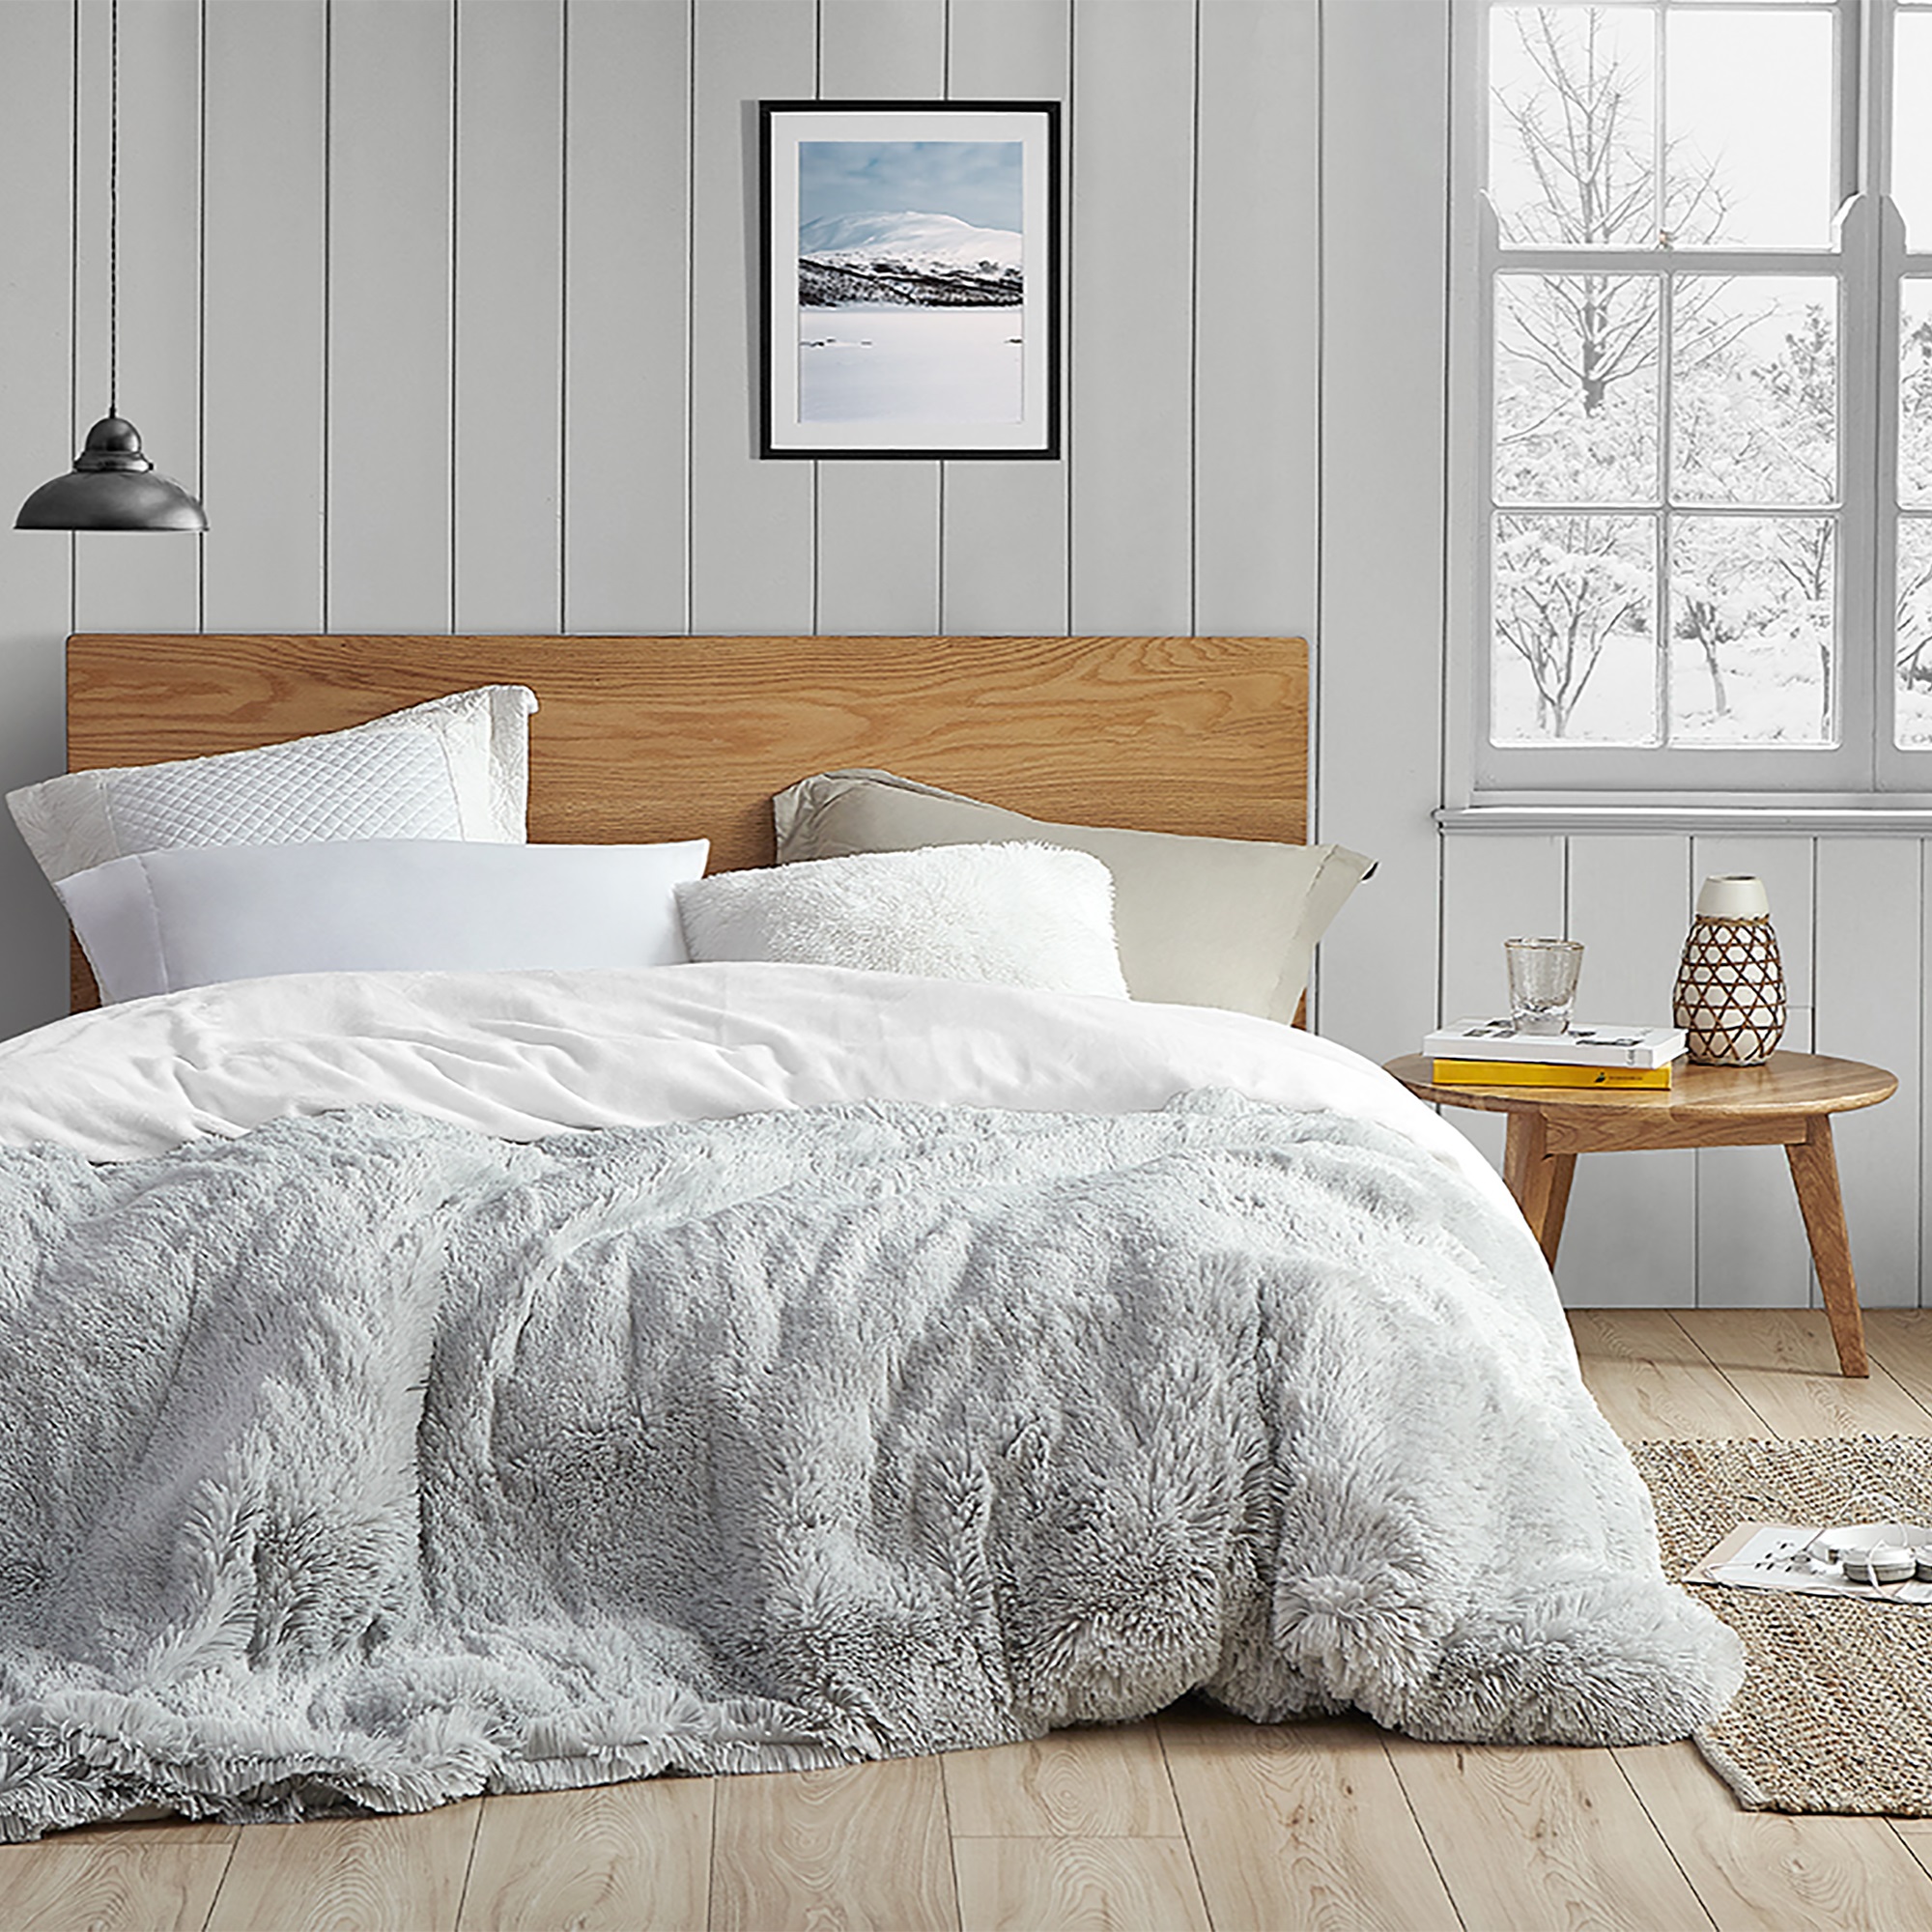 Coma Inducer?? Duvet Cover - Are You Kidding? - Glacier Gray/White